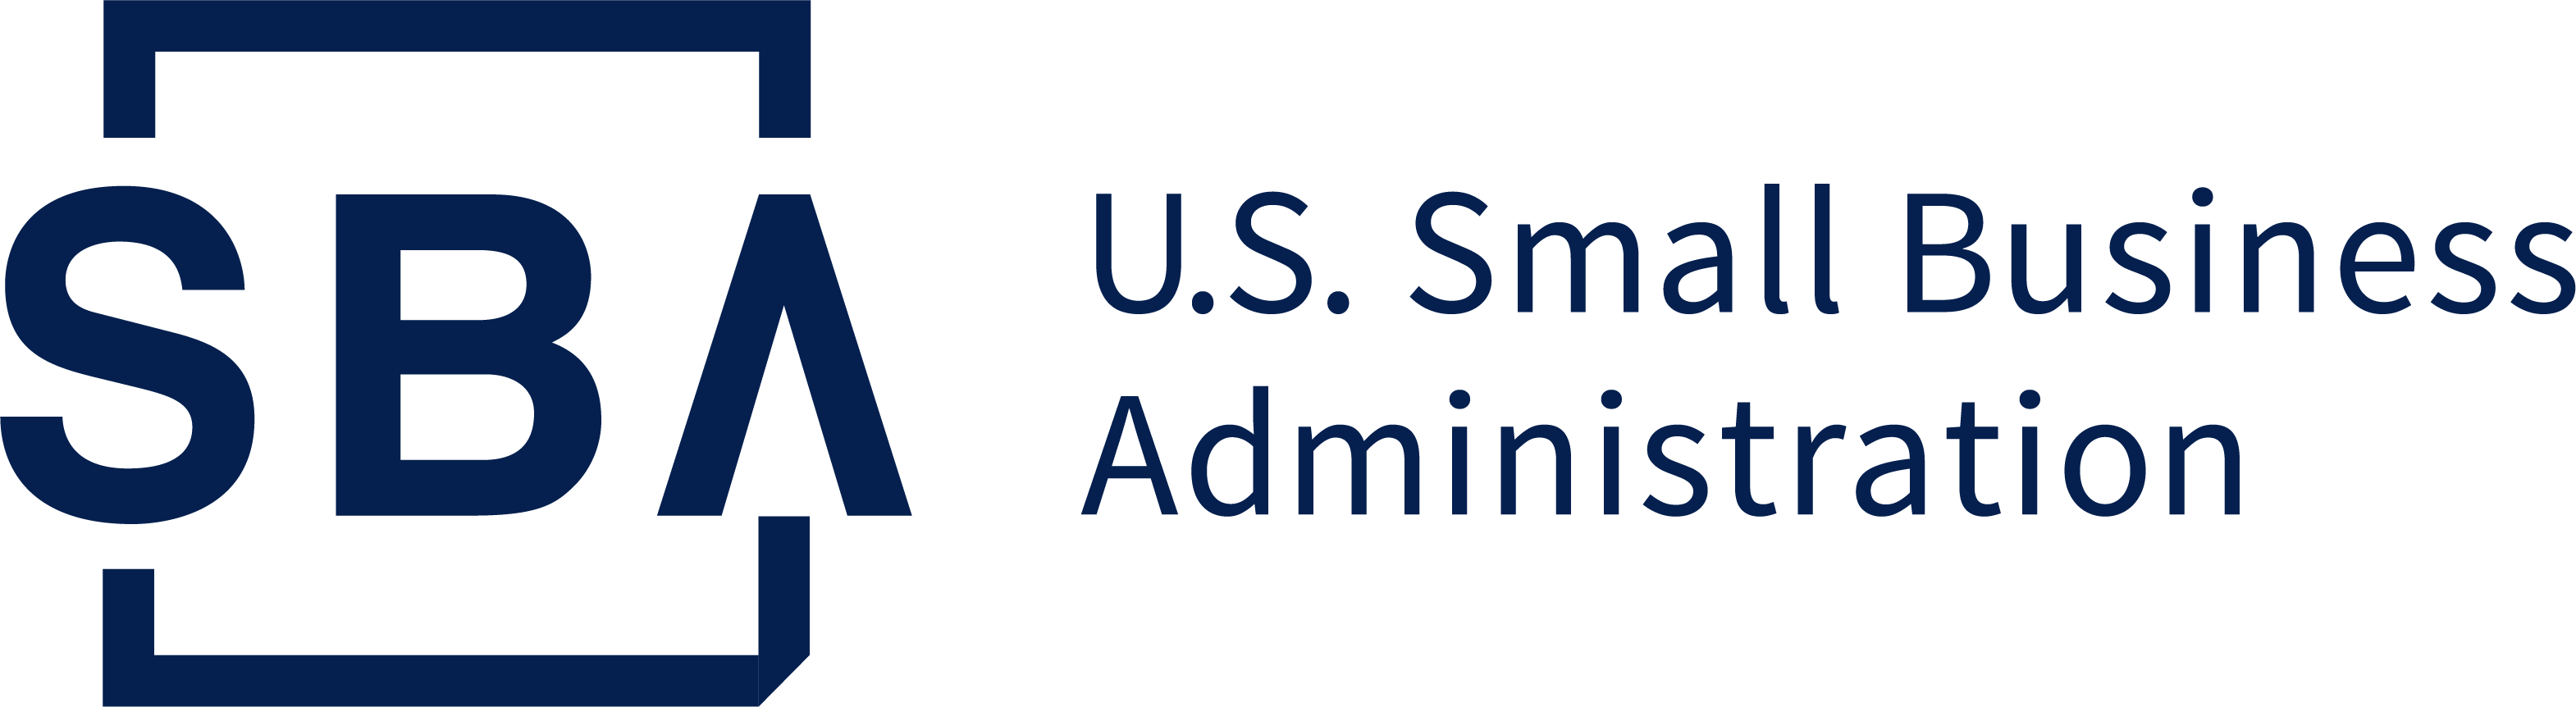 The United States Small Business Administration